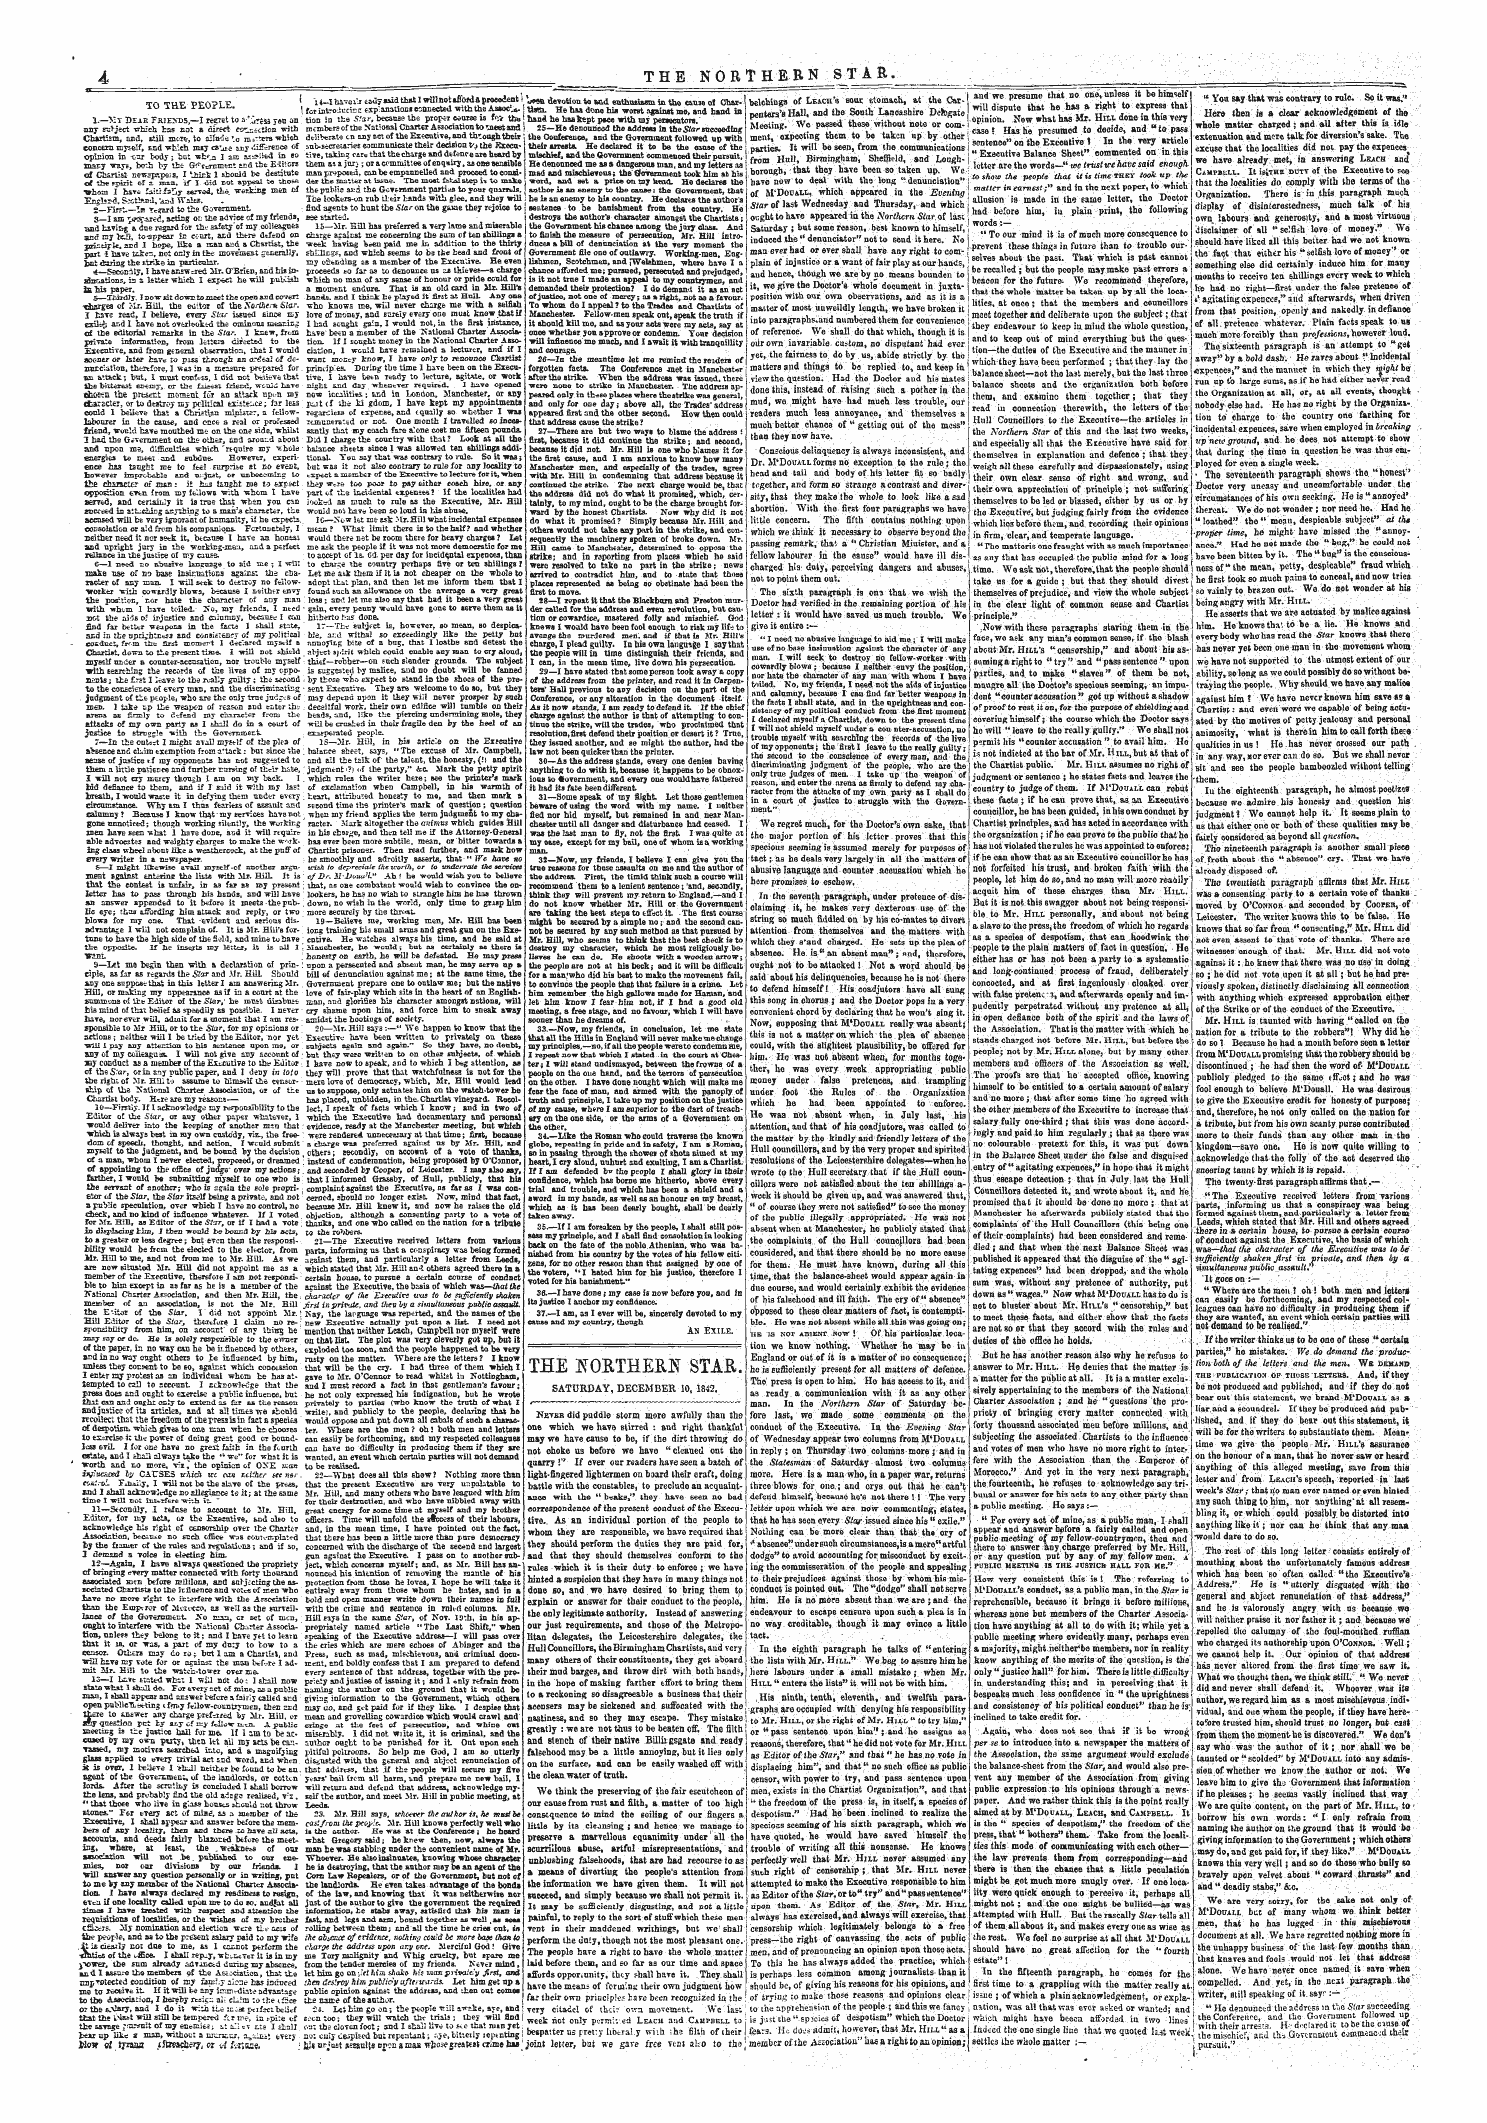 Northern Star (1837-1852): jS F Y, 4th edition - The Northern Stae Saturday, December 10, 1842.